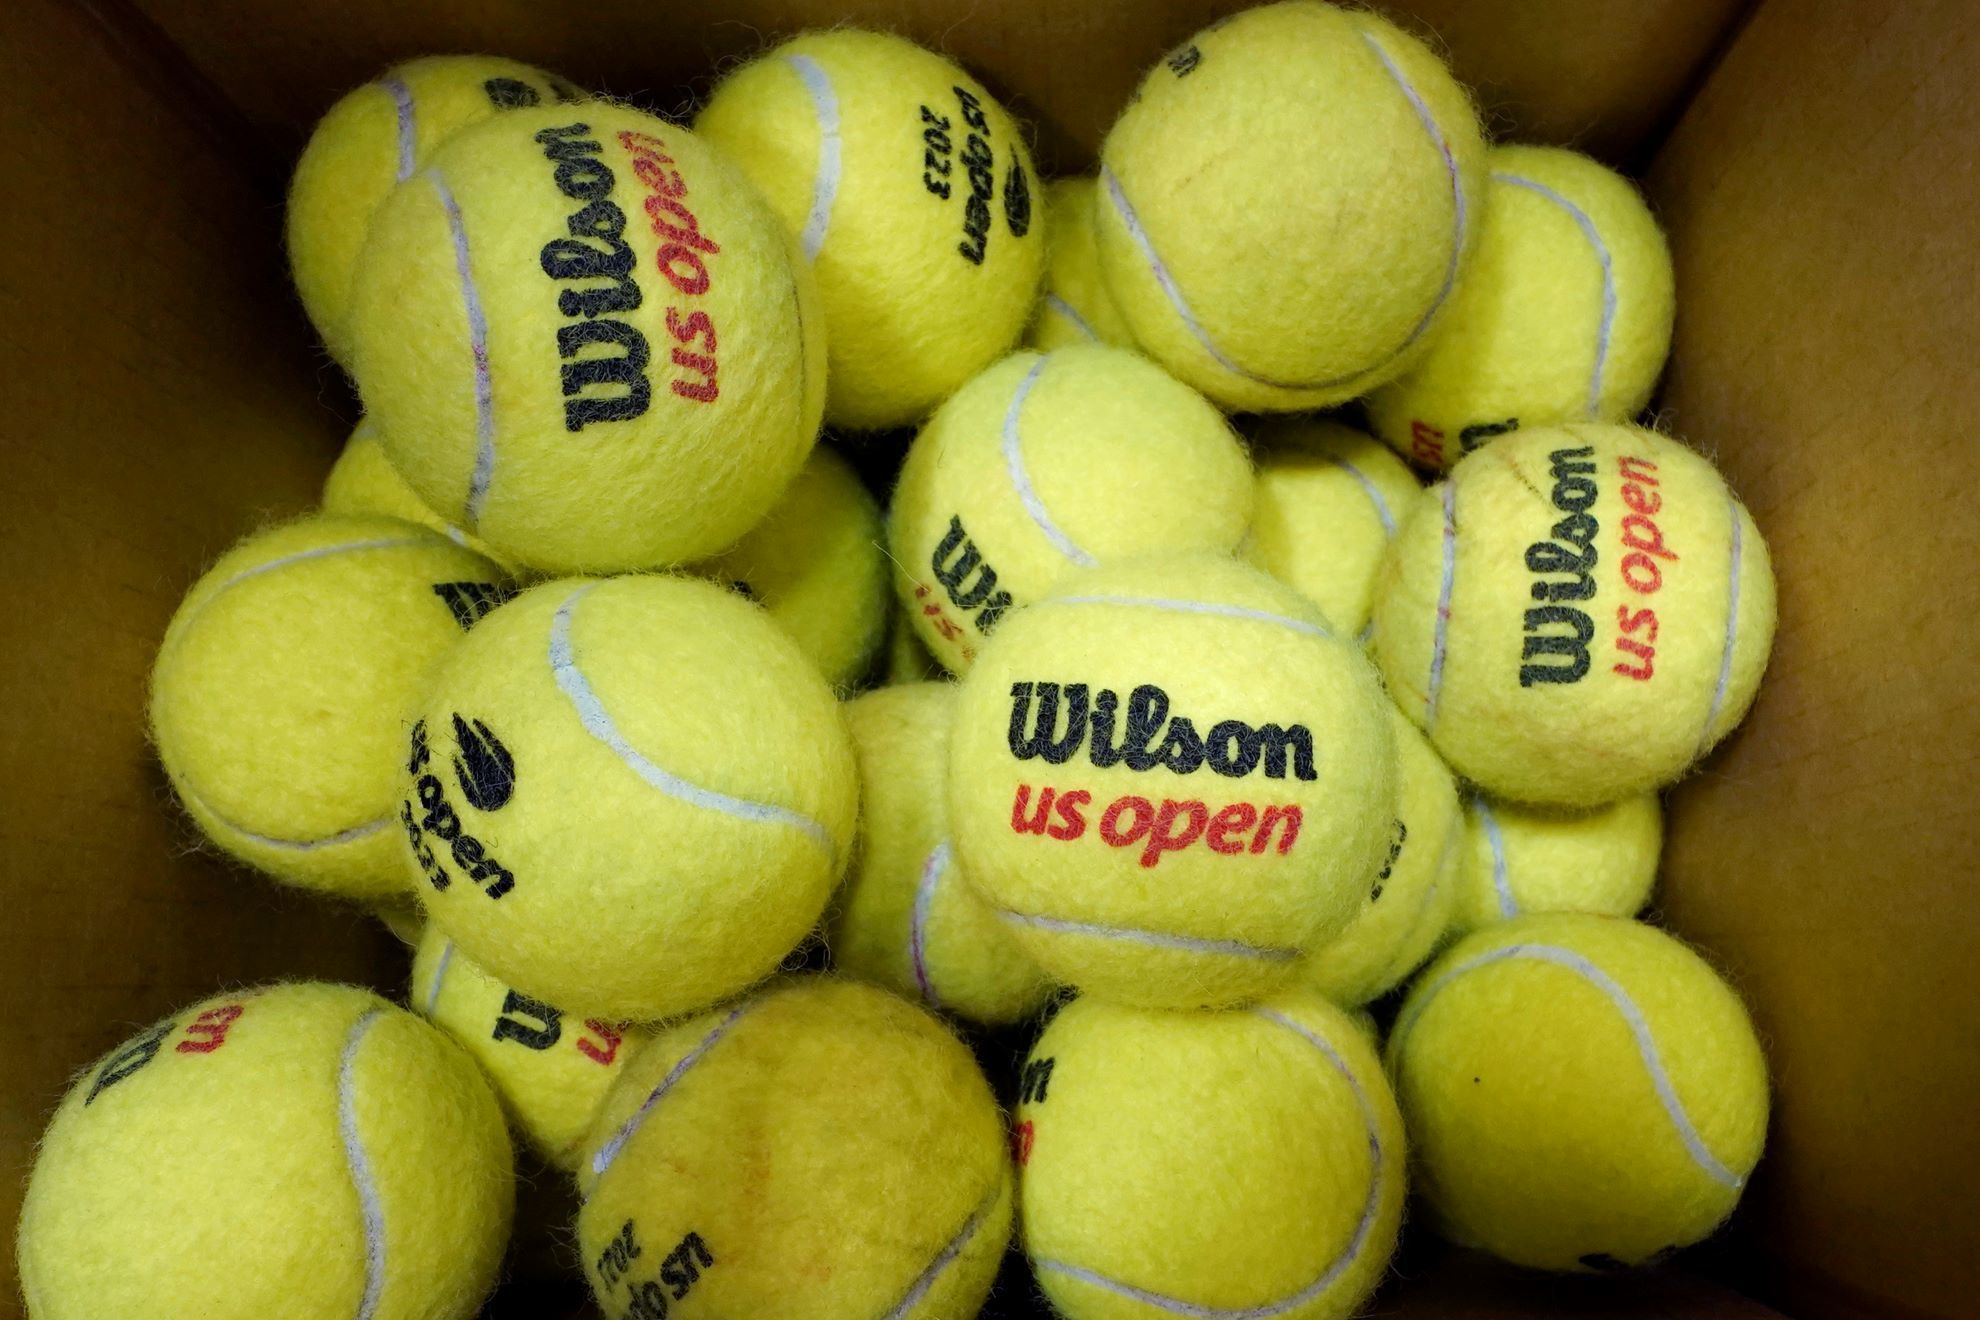 Used Wilson Racquet Sports Accessories Racquet Sports Accessories